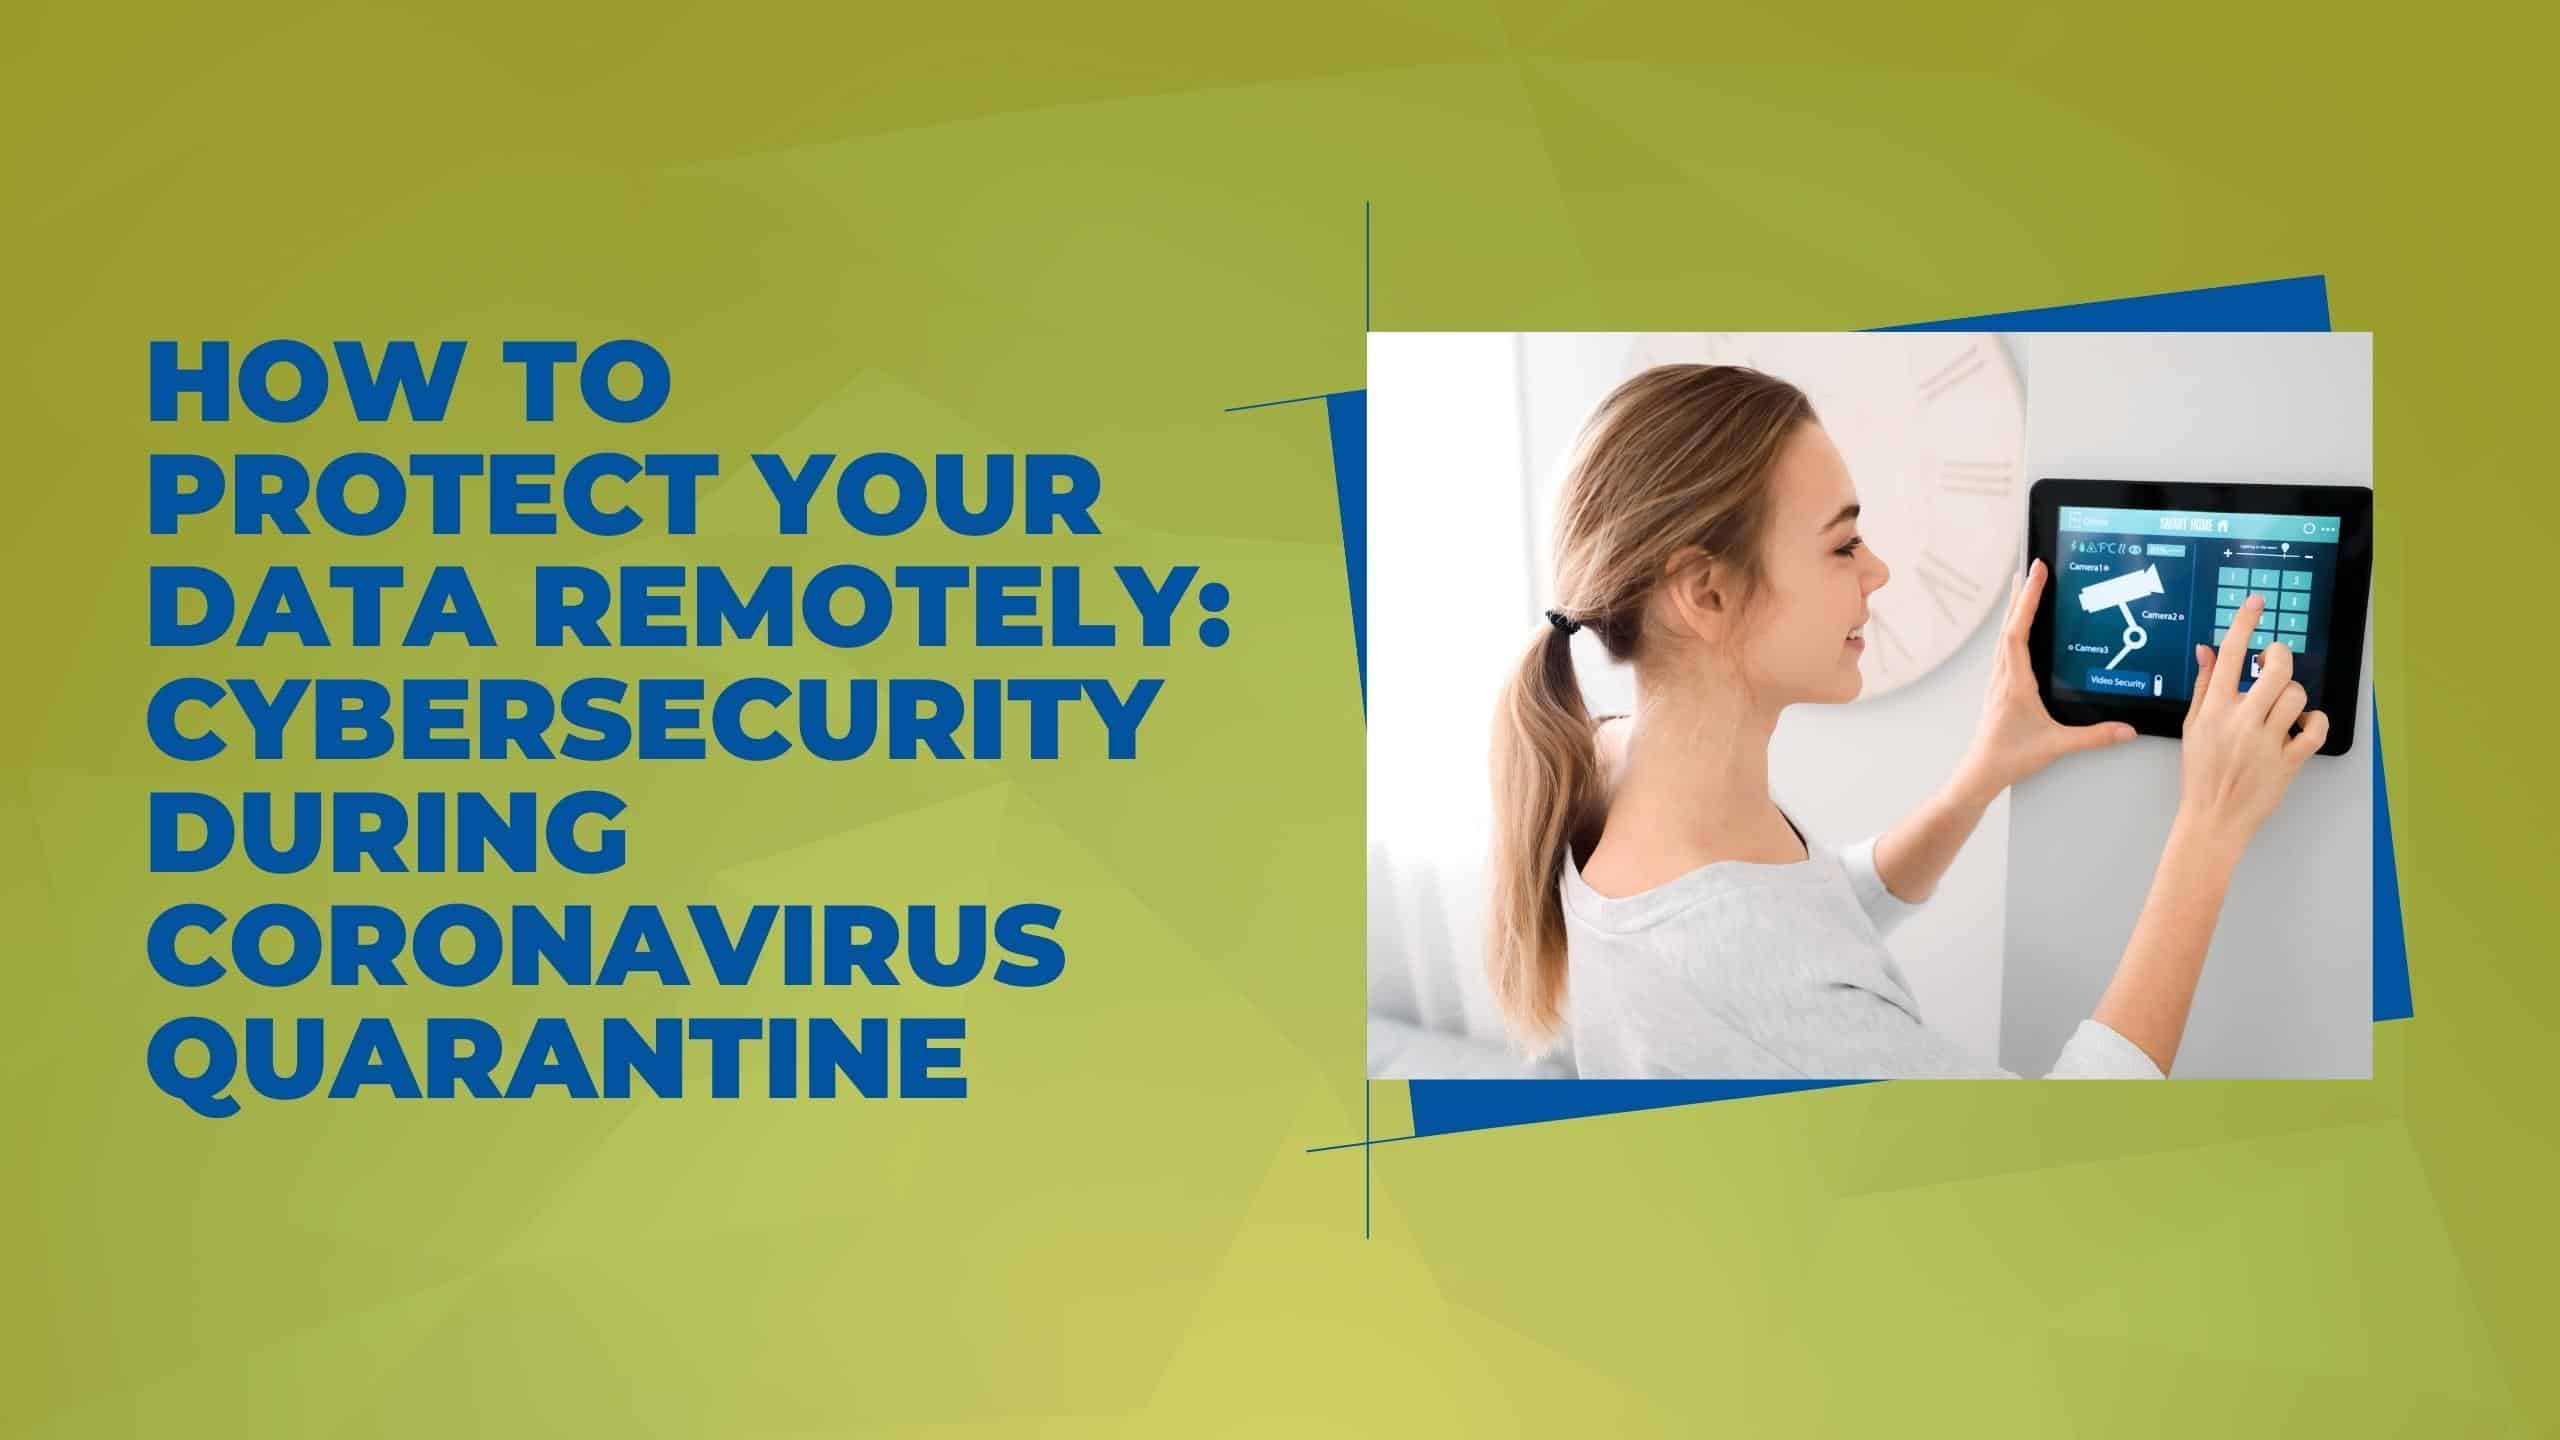 How To Protect Your Data Remotely Cybersecurity During Coronavirus Quarantine